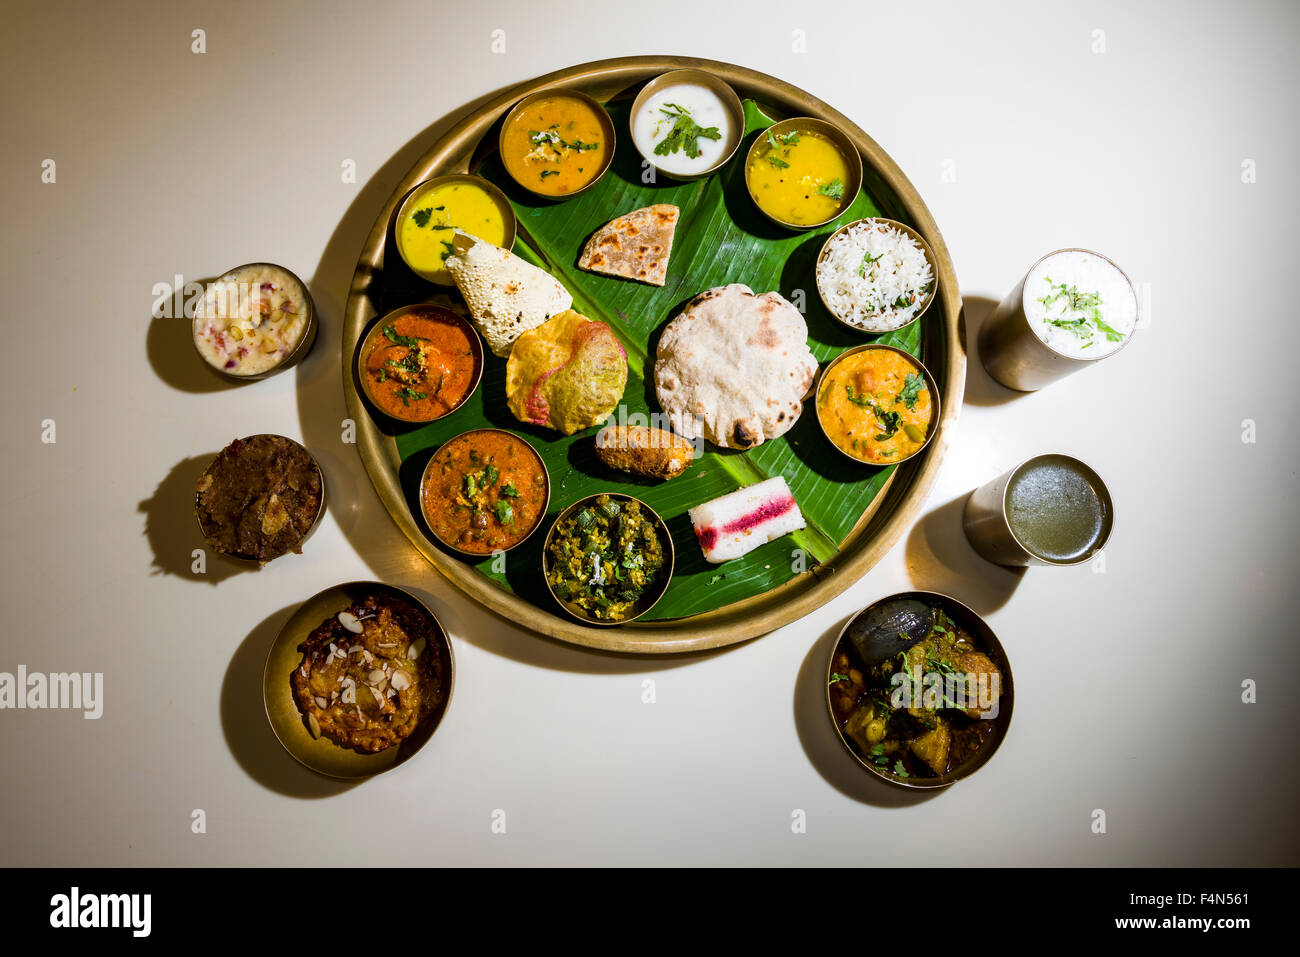 The traditional dish Thali usually consists of some different vegetable or non vegetable dishes, rice, curd, bread, papadam and Stock Photo